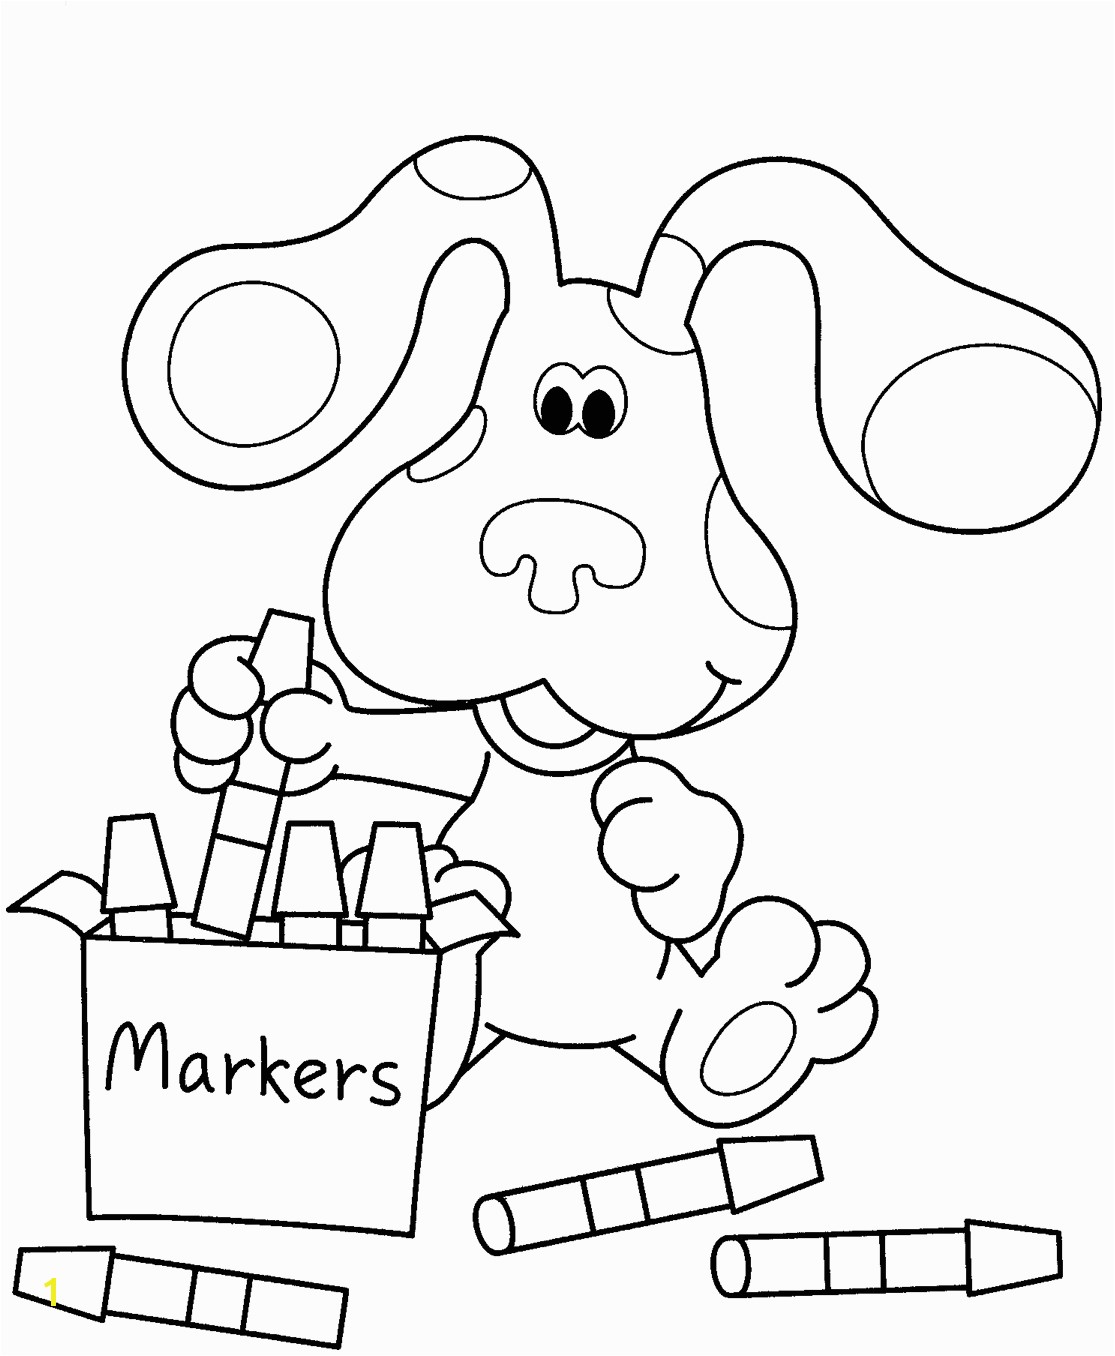 Awesome Turn Picture Into Coloring Page shop More Image Ideas